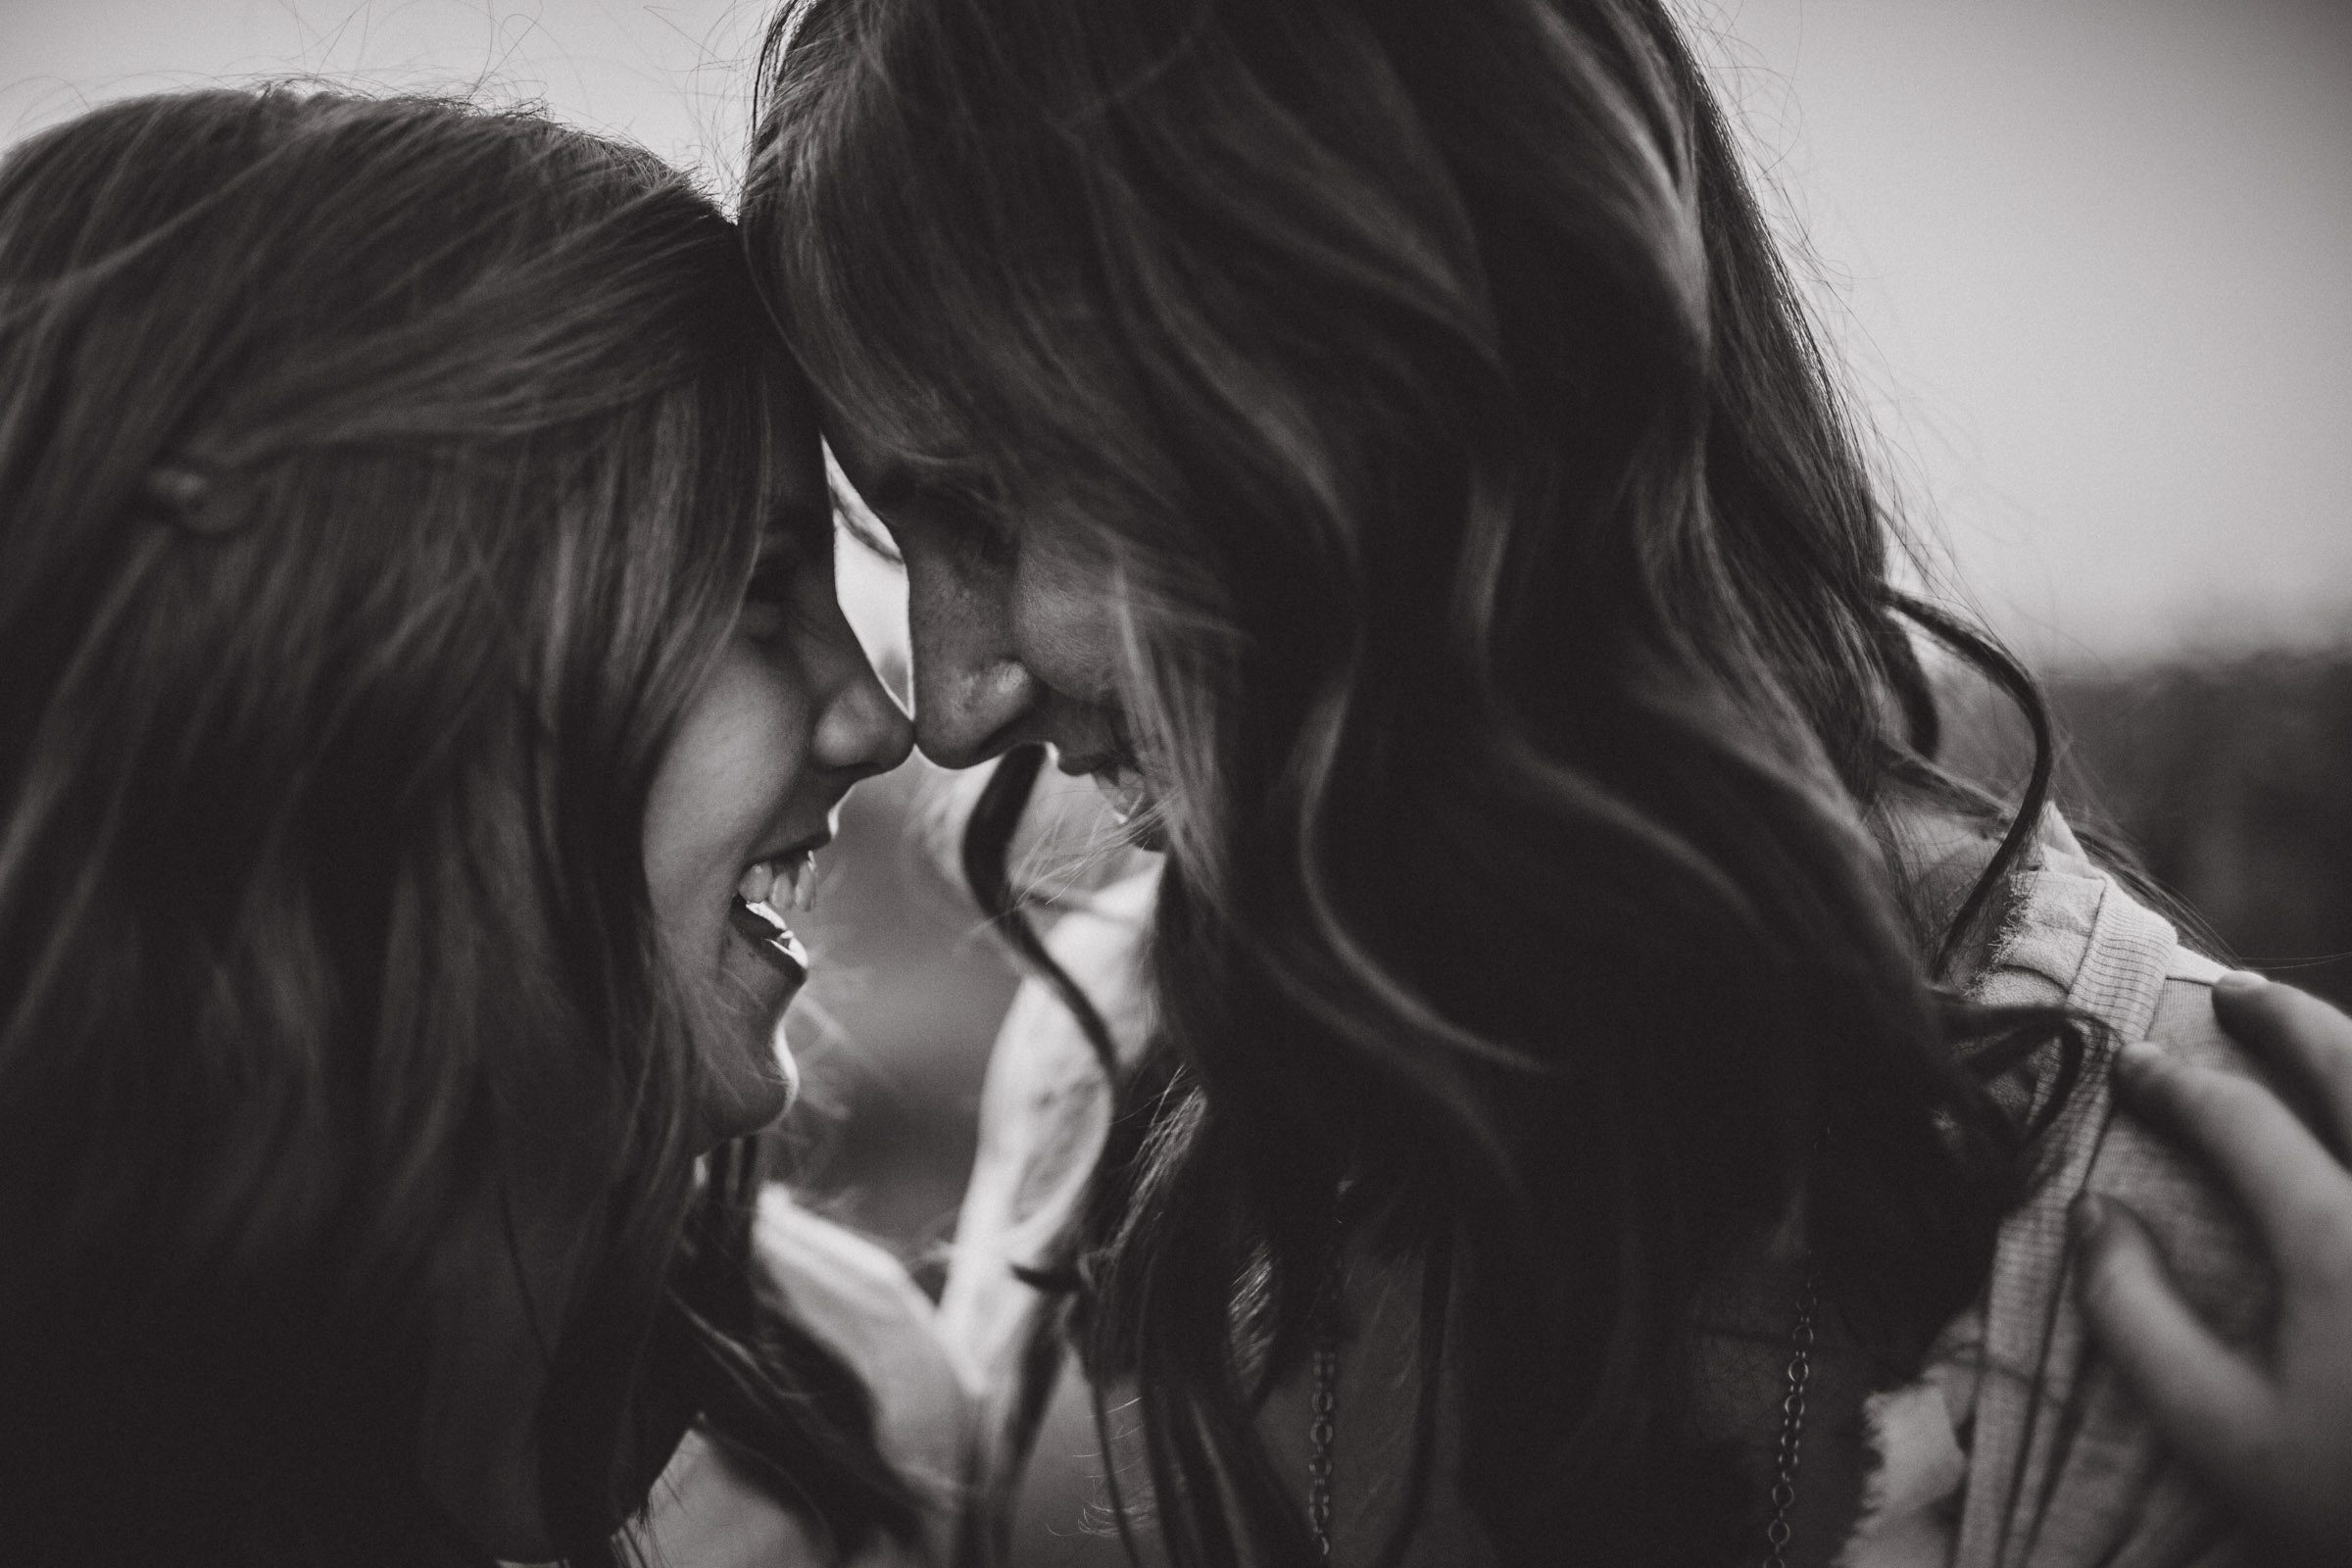 mother and daughter connecting with noses, black and white portrait 